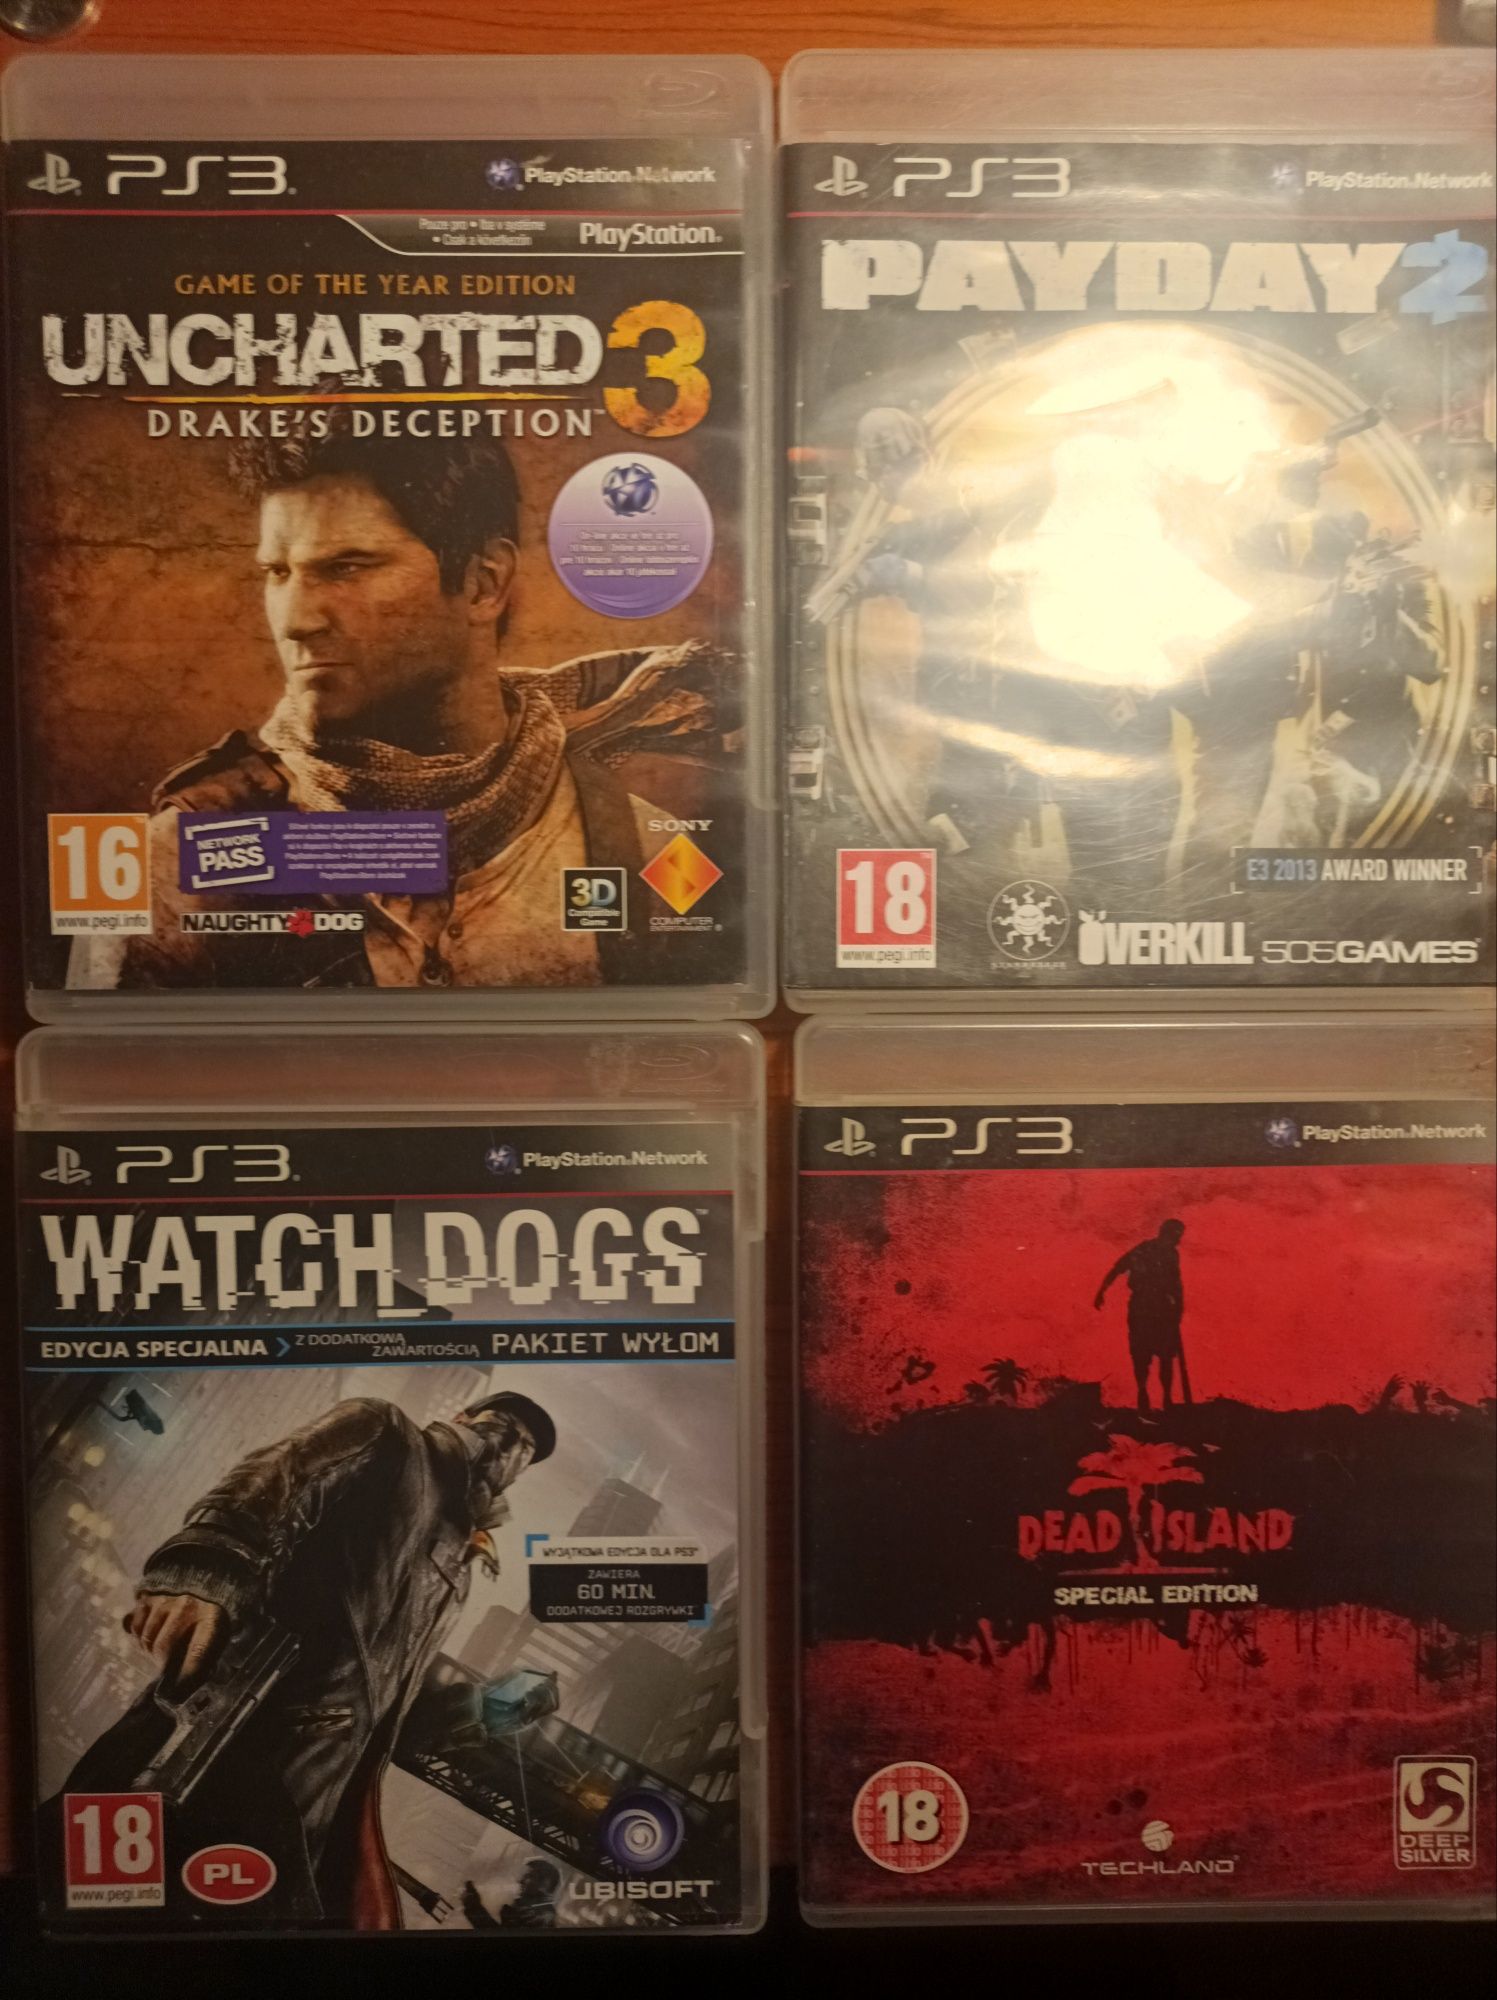 Gry na ps3- Uncharted 3, Payday 2, Dead island, Watch dogs